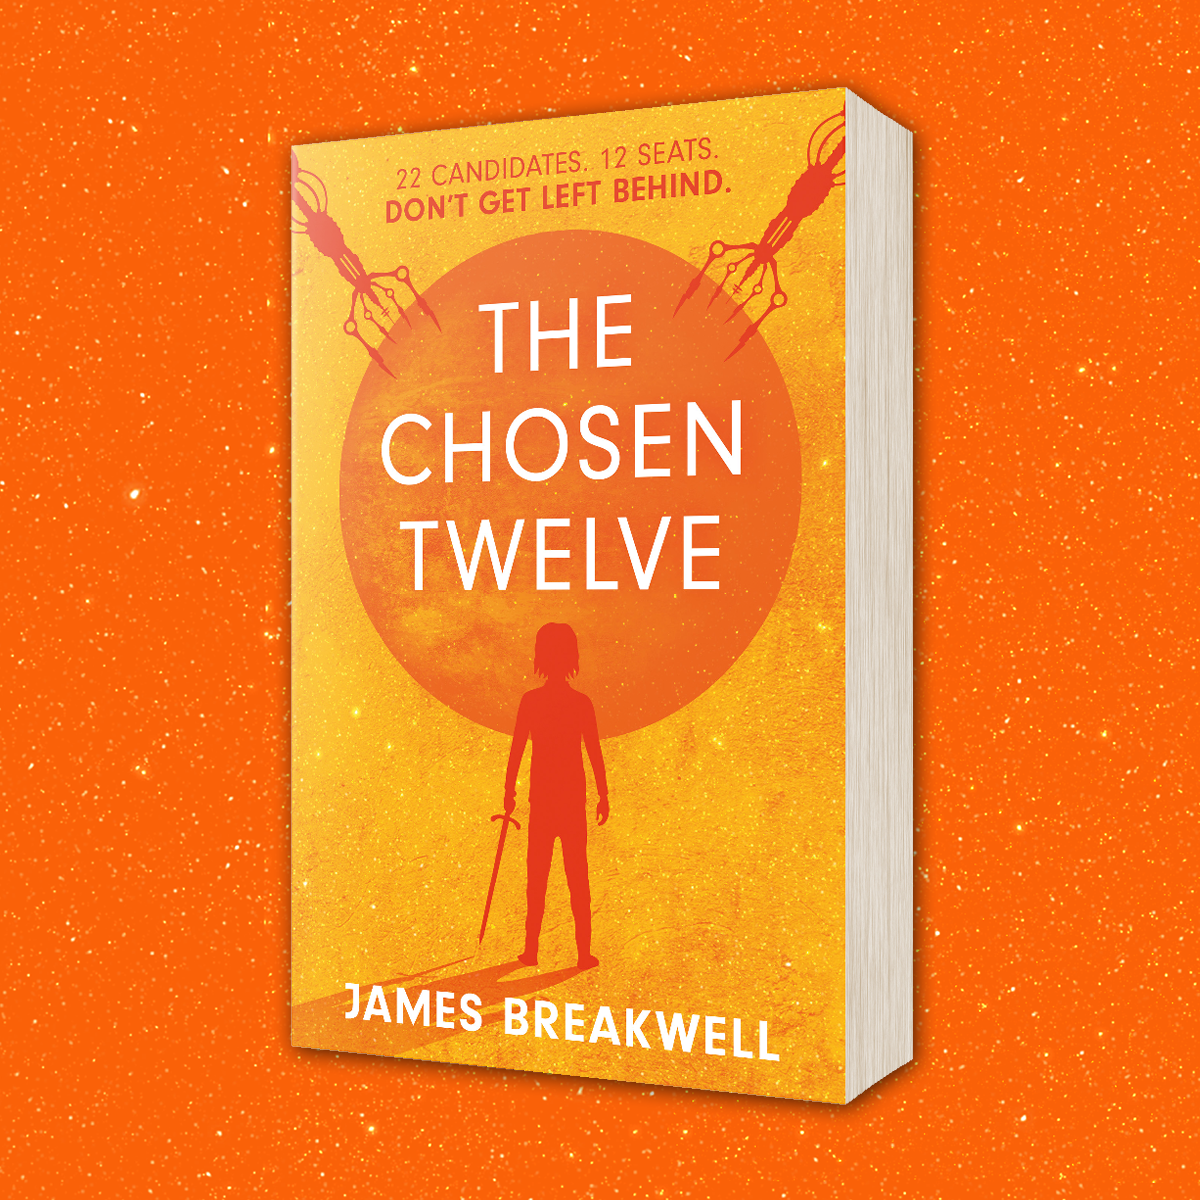 OUT NOW: The Chosen Twelve by James Breakwell!